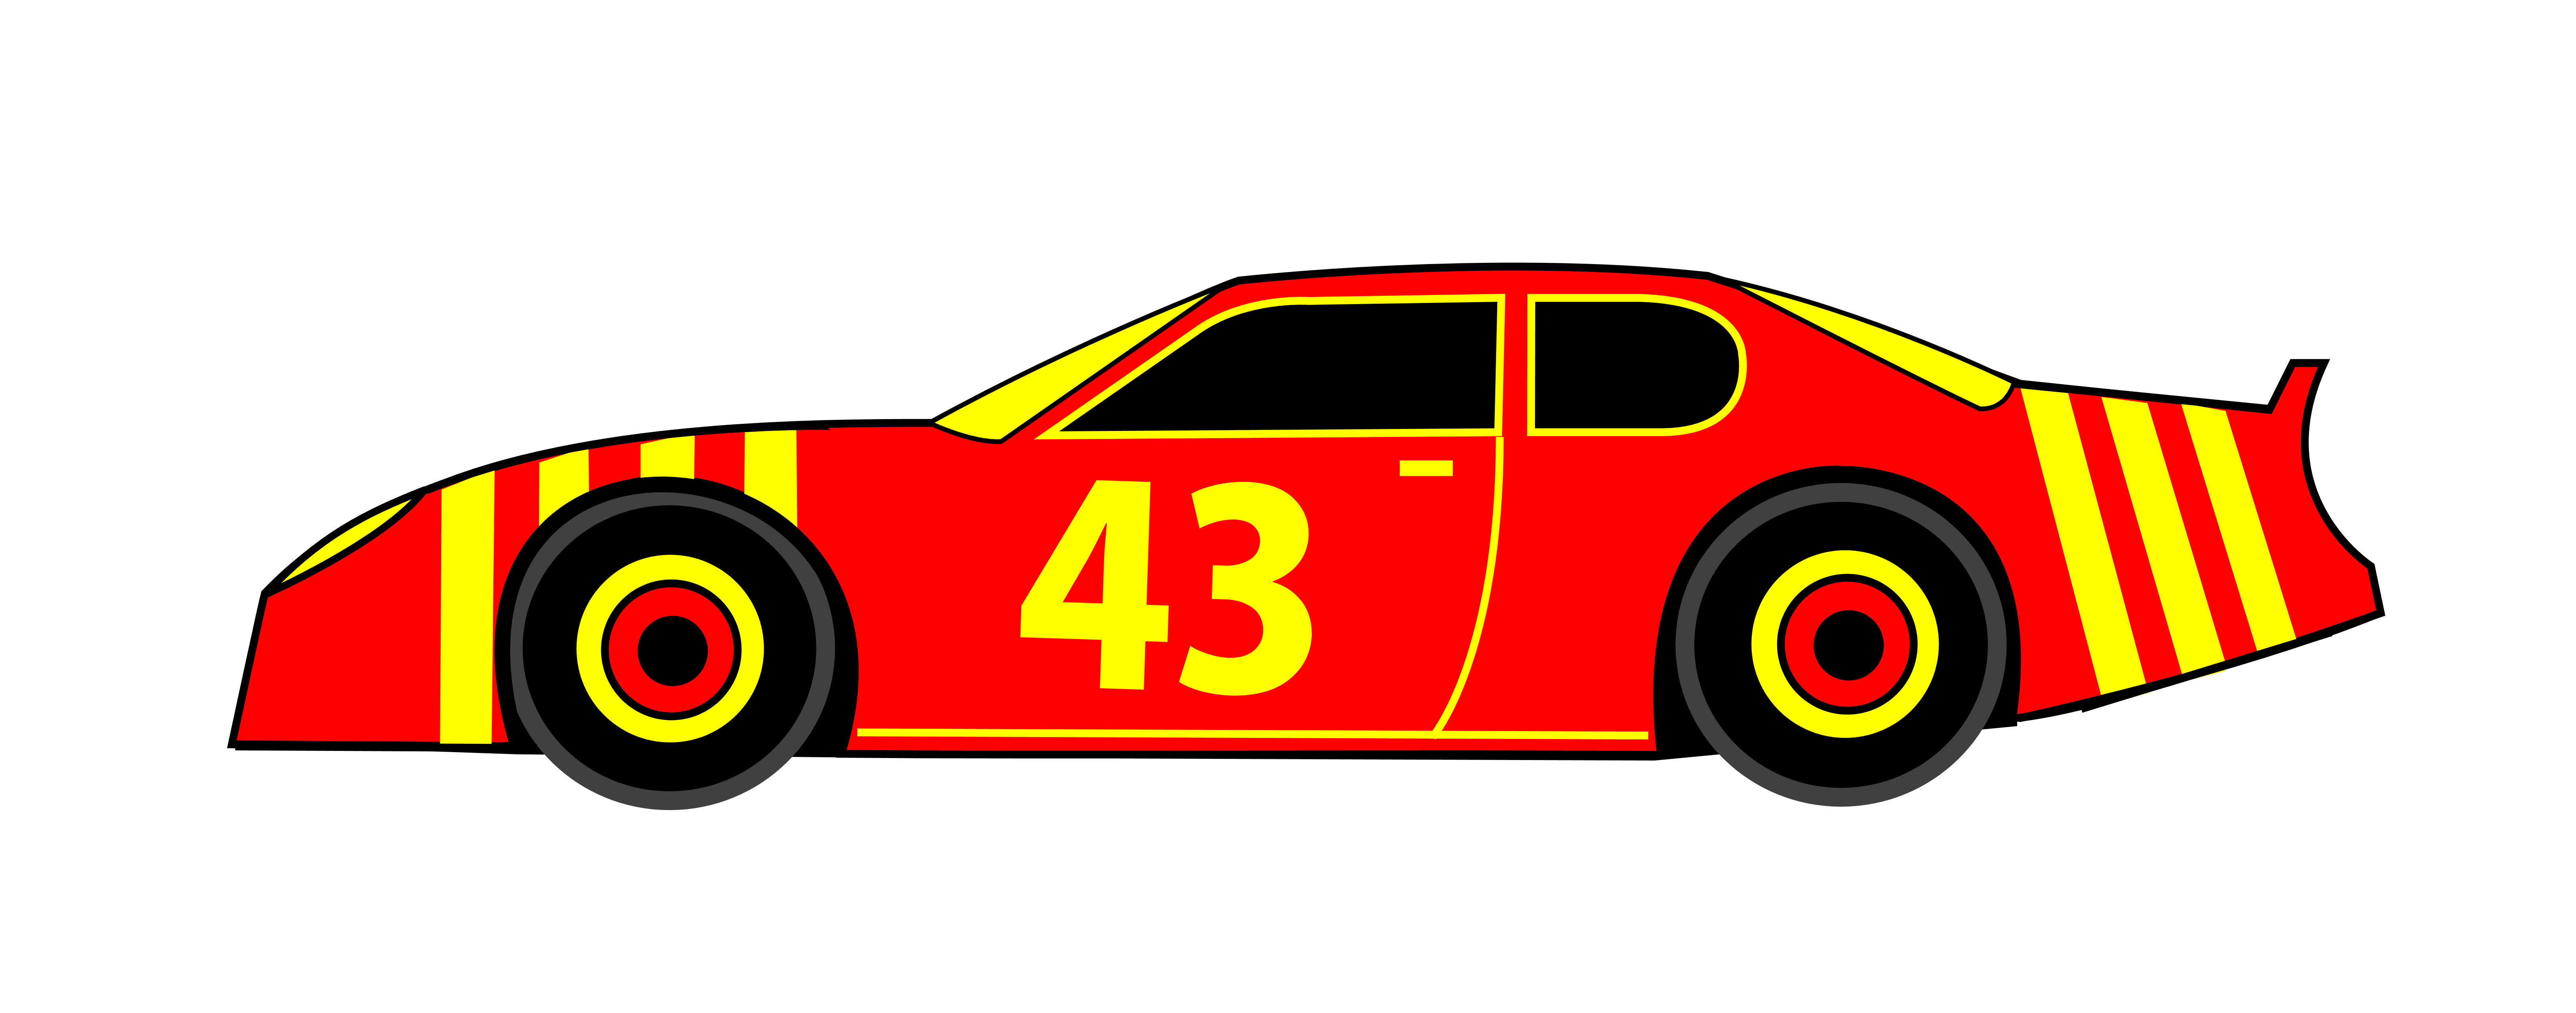 Commercial Use Race Car Clipart Cool Racing Cars Racing Car Clipart